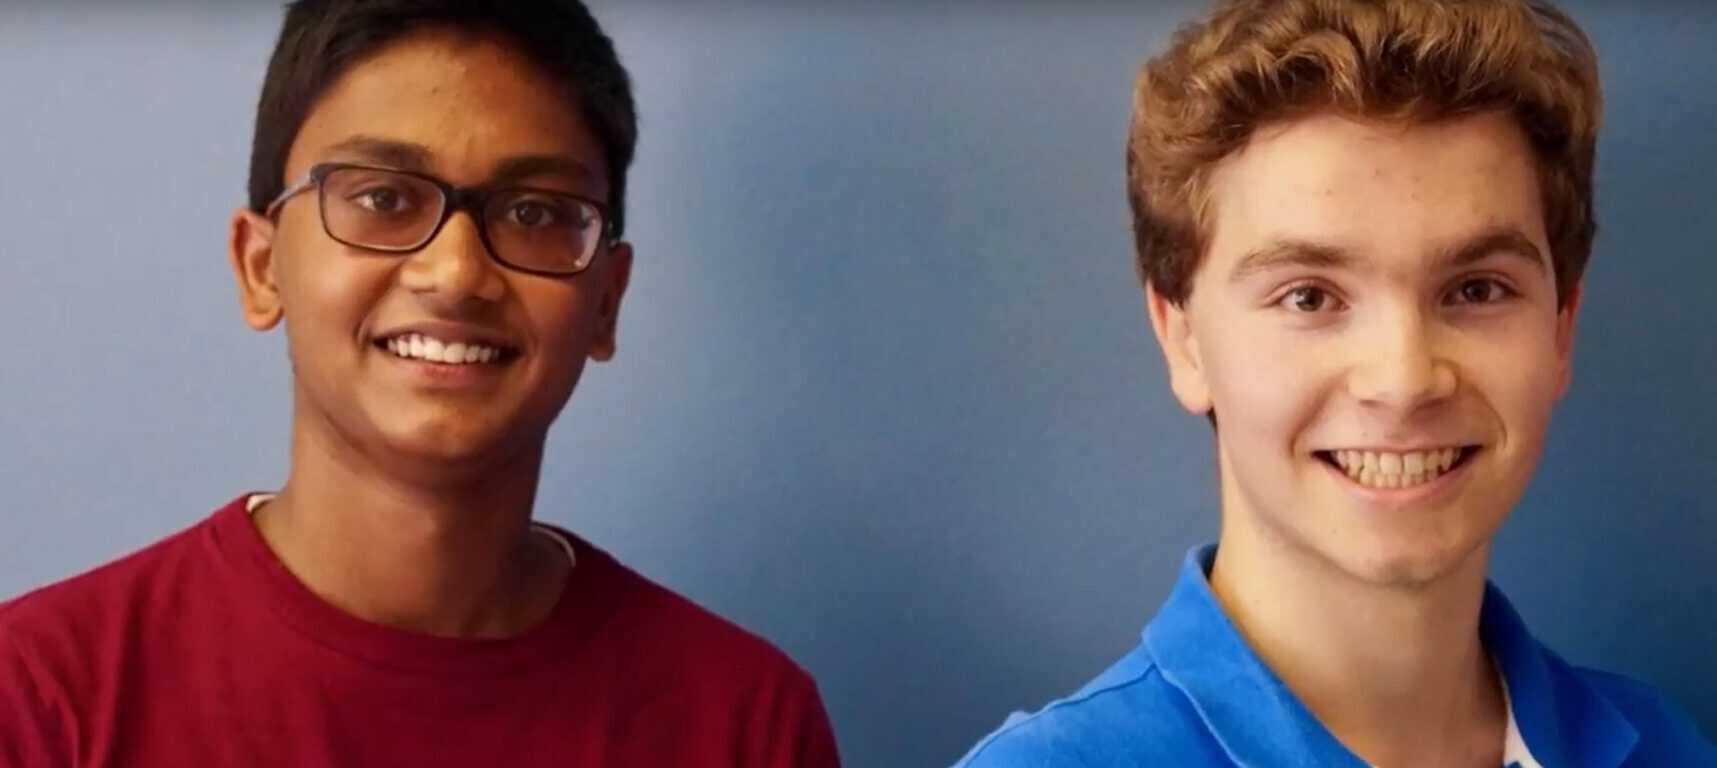 Two teen tech entrepreneurs view Microsoft as doing really "cool things" - OnMSFT.com - August 3, 2017